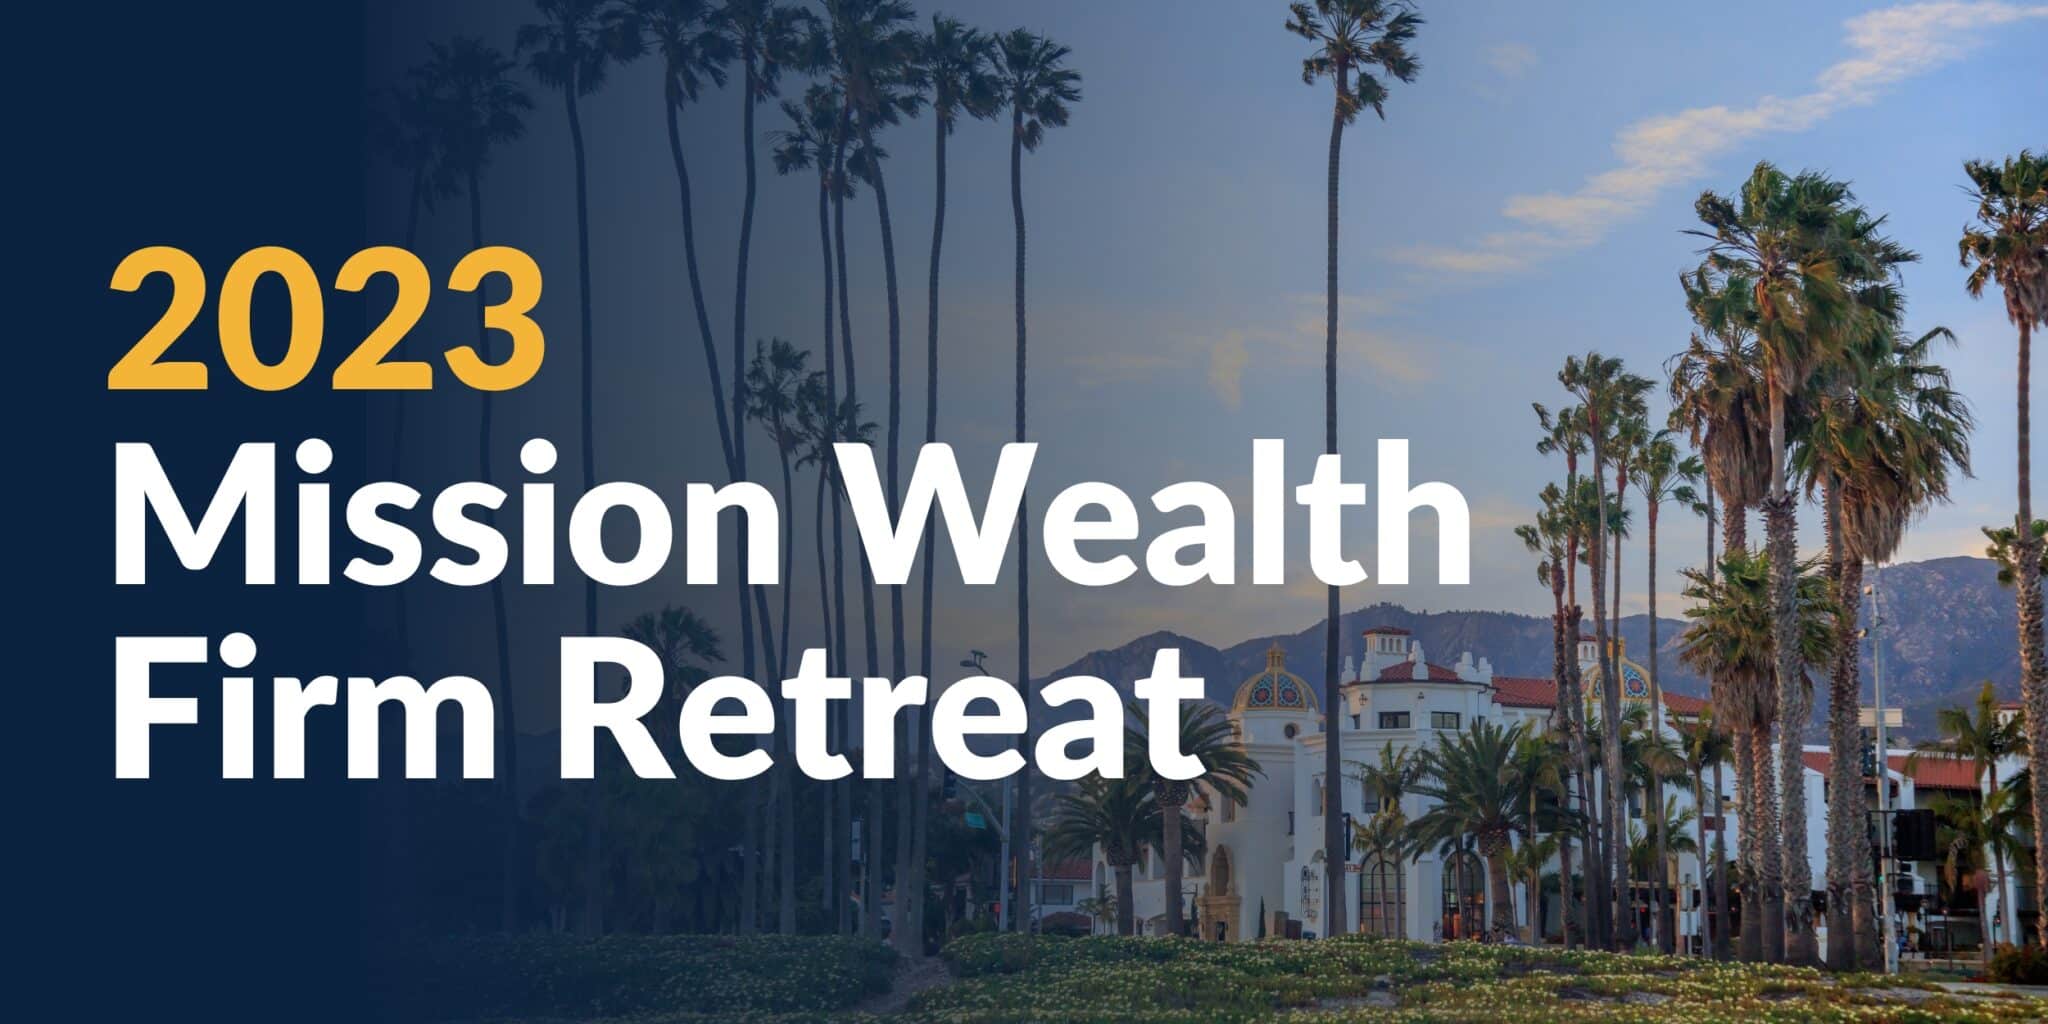 Mission Wealth Making Waves with Firm Retreat in Santa Barbara